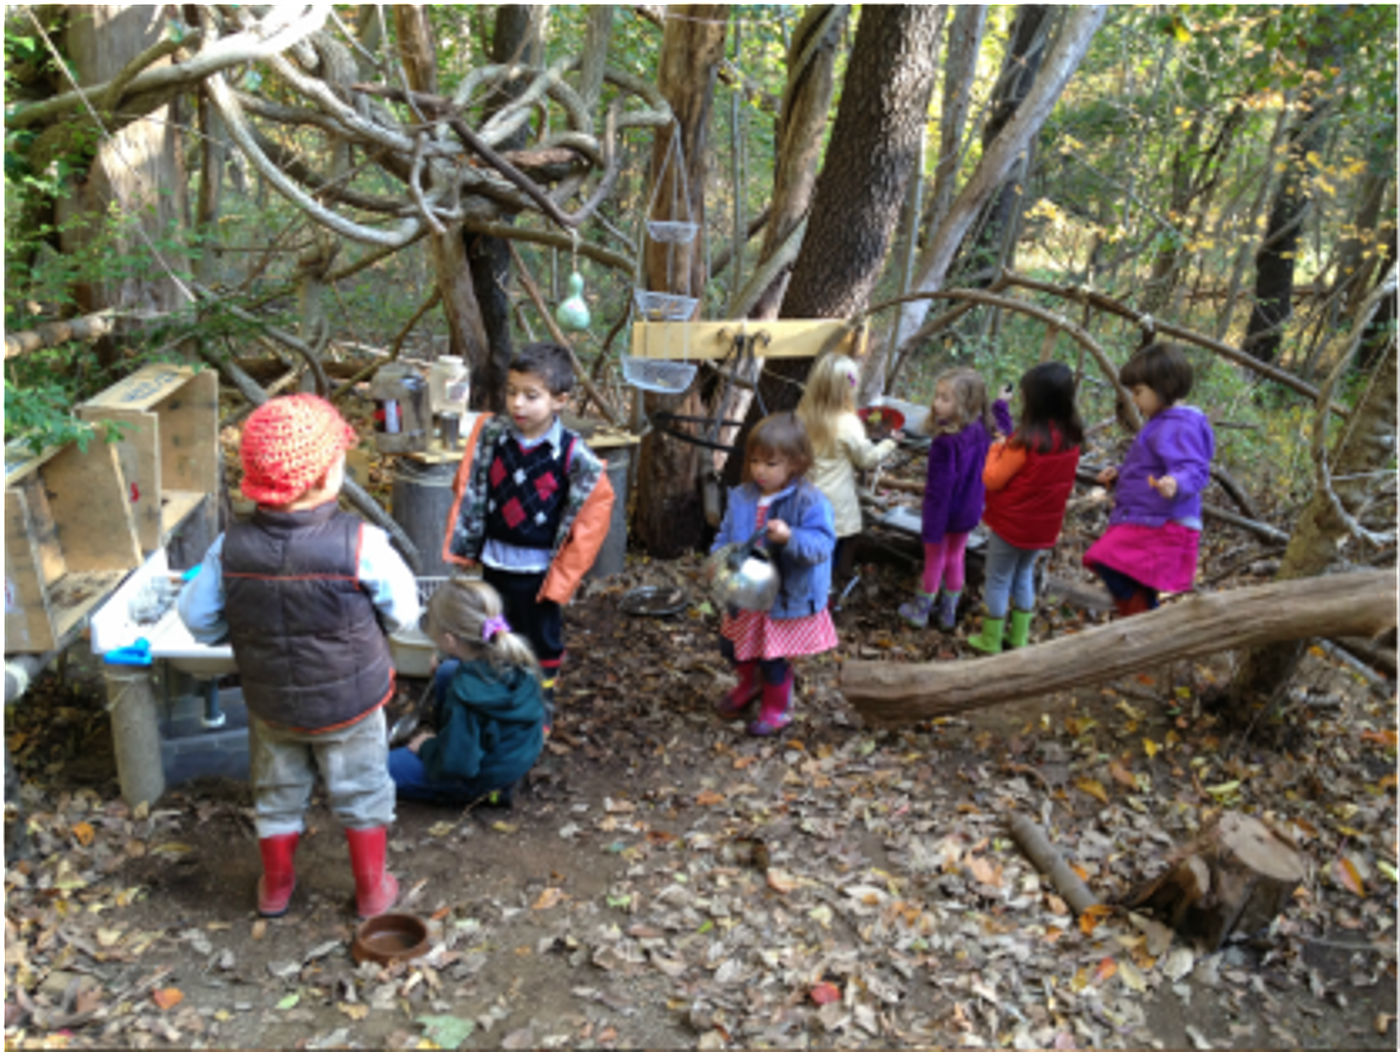 Children explore an outdoor classroom at Eyes of the World Discovery Center Preschool. Photo: eyesoftheworlddiscoverycenter.weebly.com